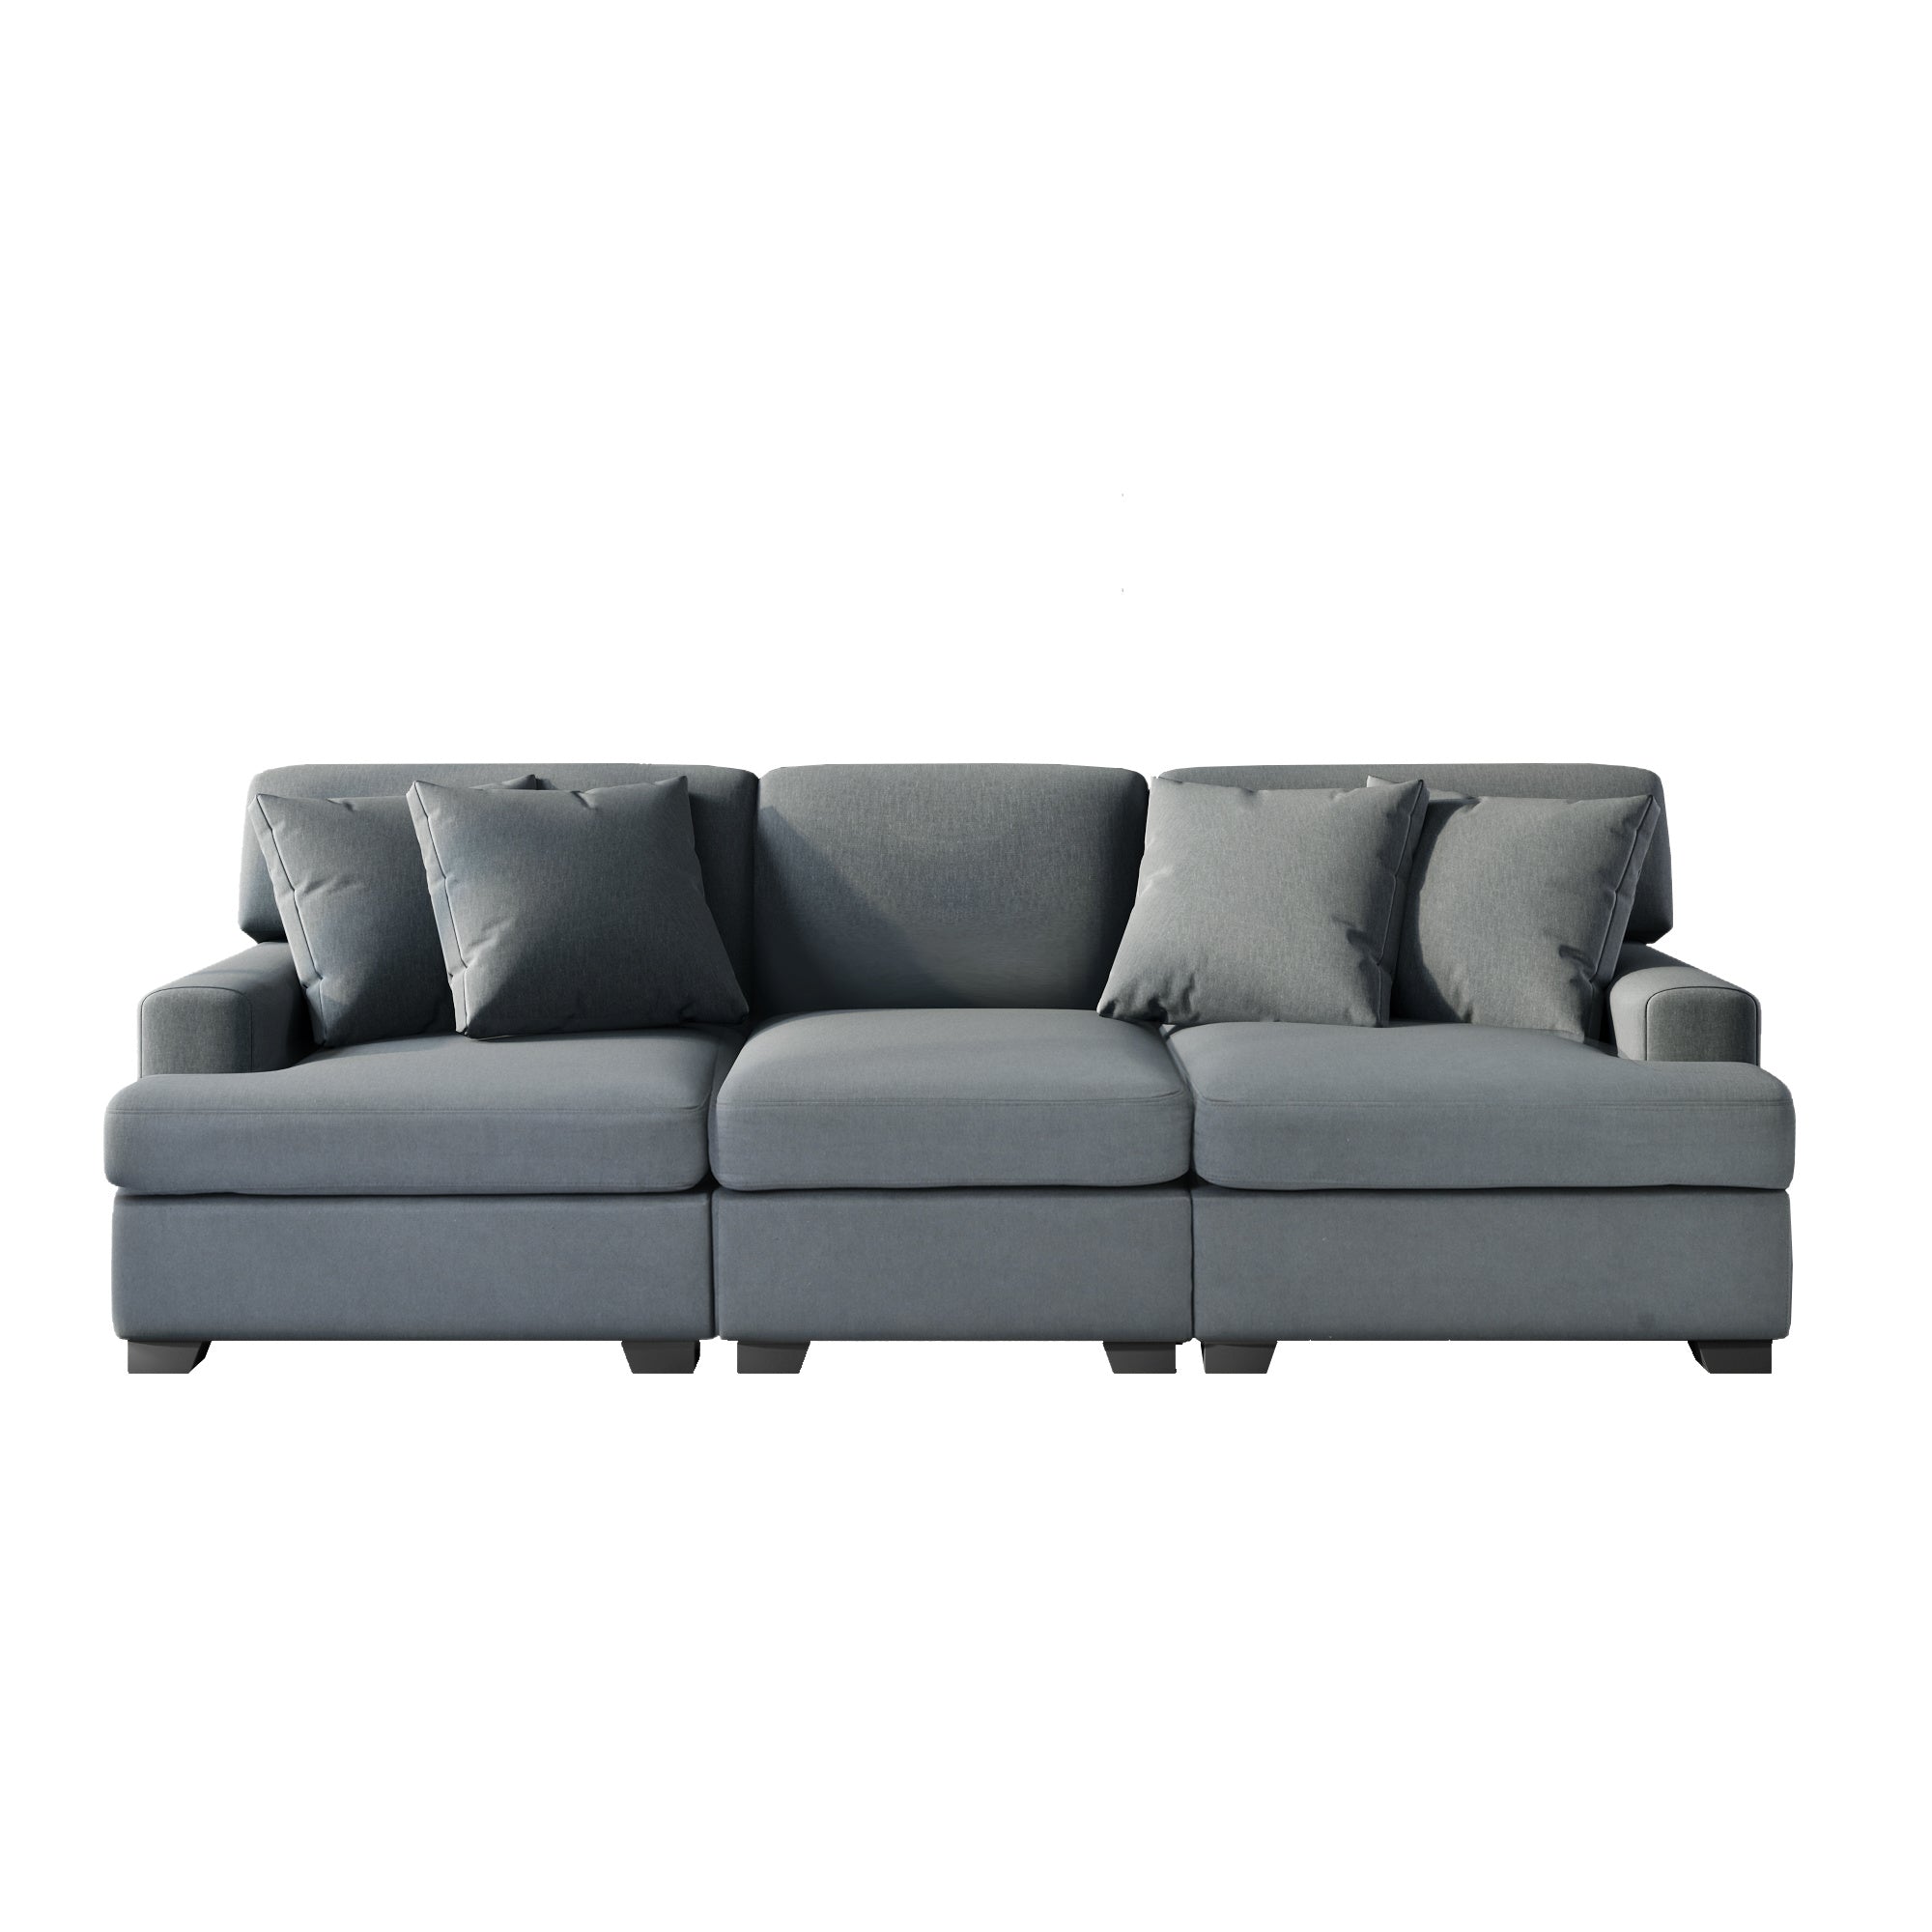 3 Seat Sofa with Removable Cushions